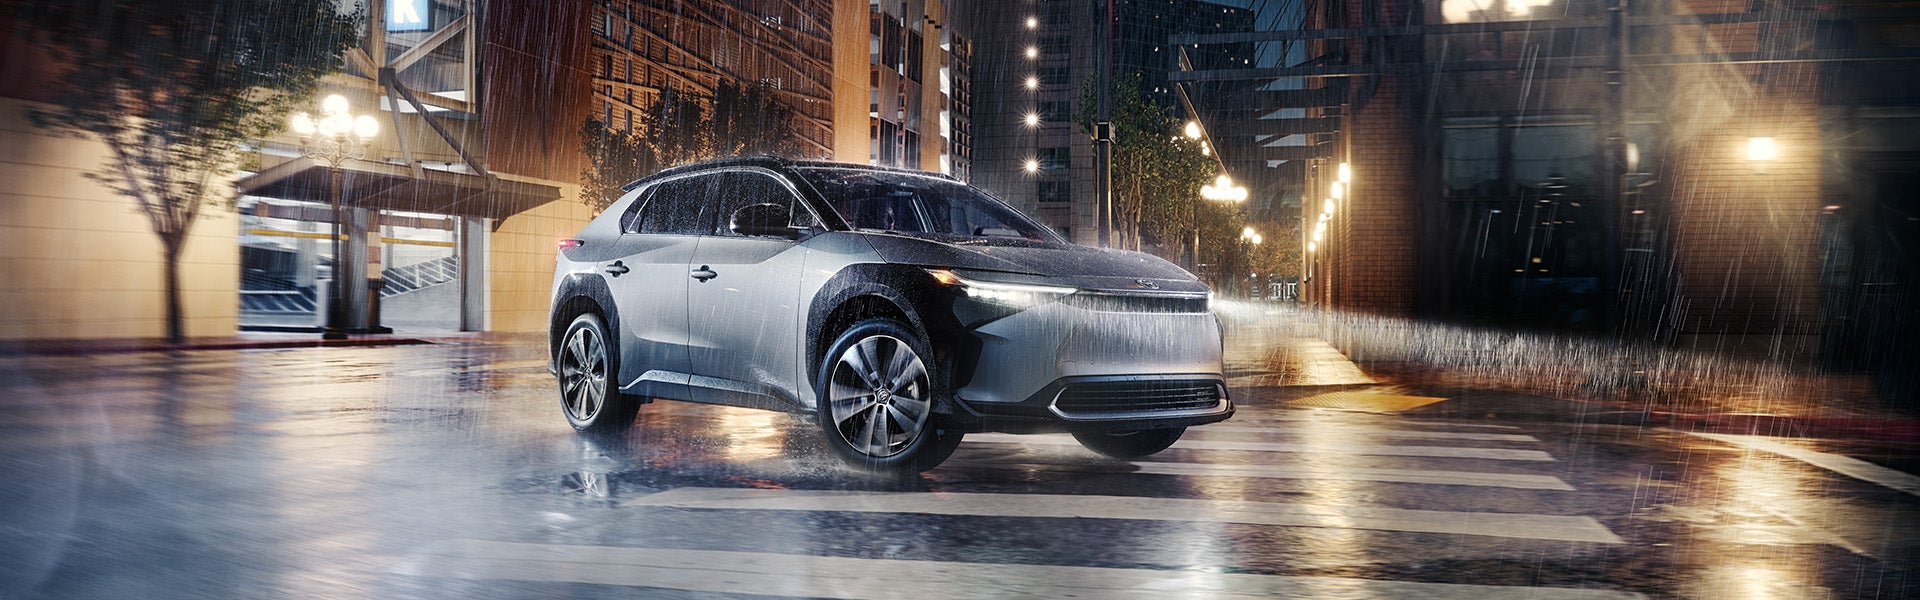 The All-New Toyota Electric Car: The Toyota bZ4X BEV at Bennett Toyota of Allentown | Silver bZ4X BEV Driving Through Pouring Rain In City Streets at Night